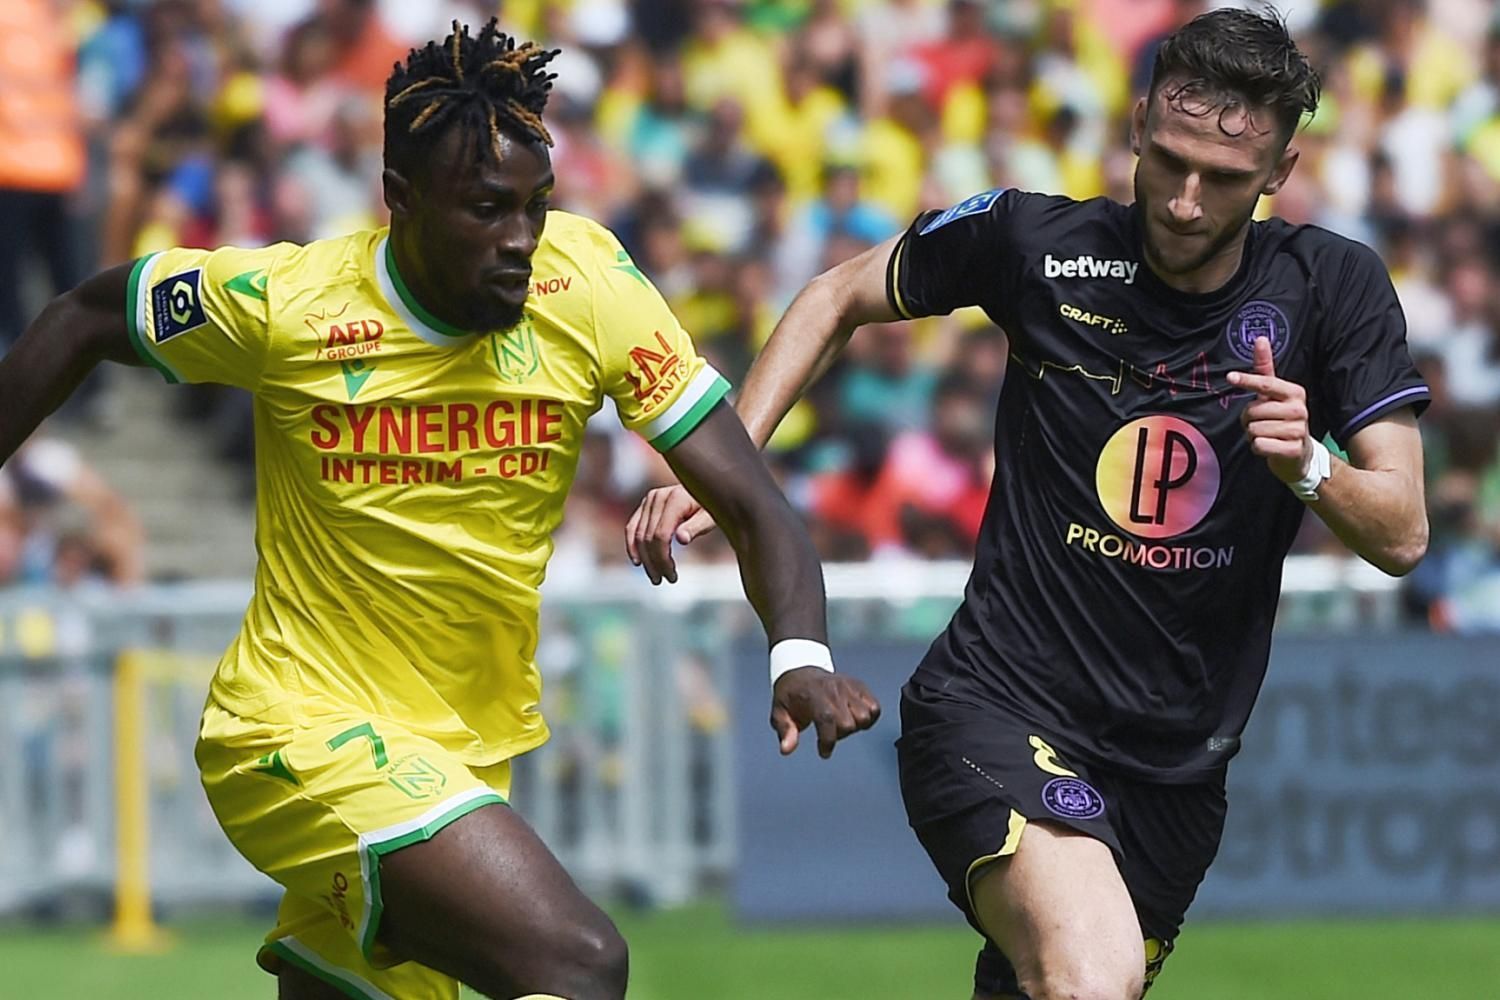 Nantes and Toulouse will meet in the Coupe de France final on Saturday